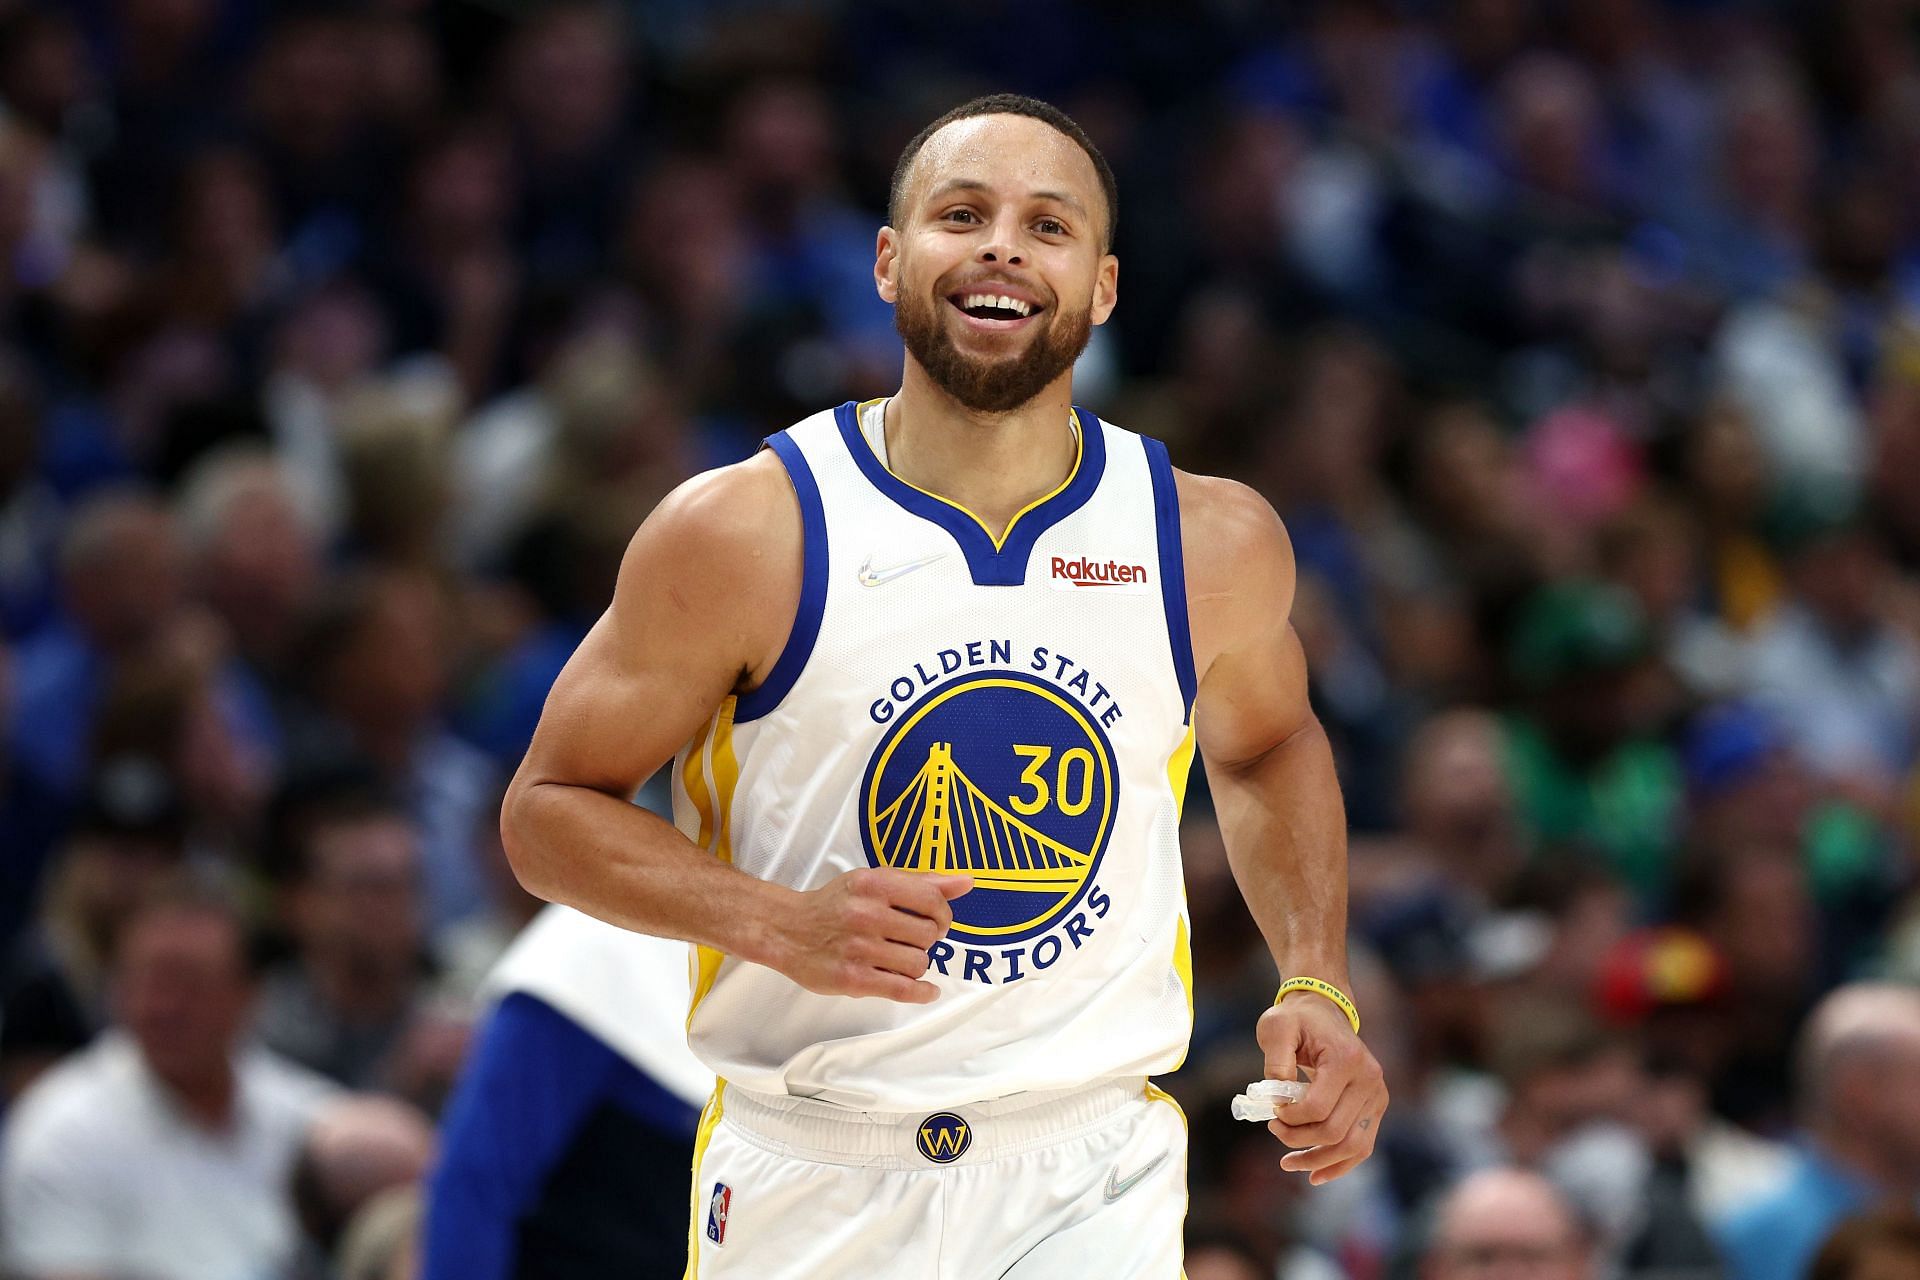 Steph Curry of the Golden State Warriors during the 2022 NBA Western Conference Finals